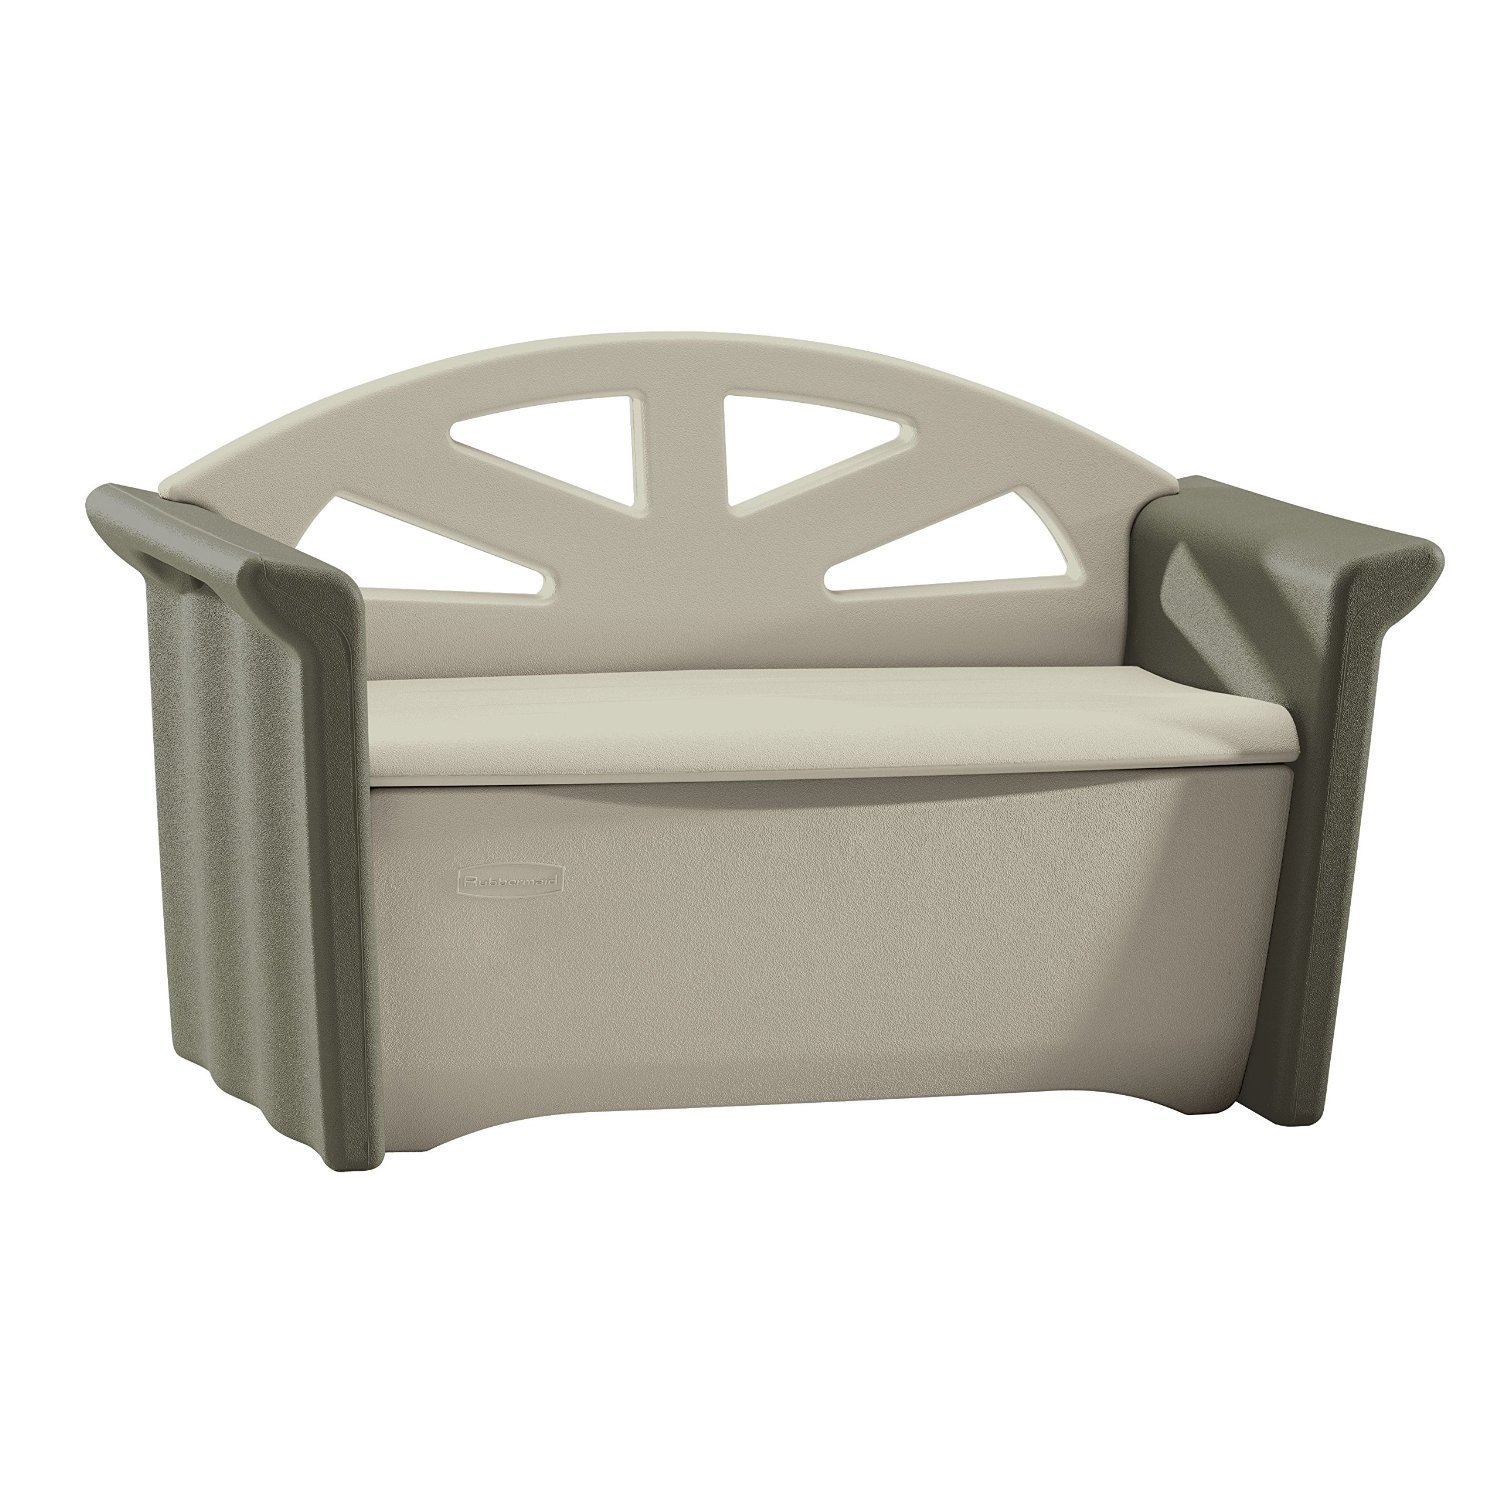 Ribbermaid outdoor patio storage bench shown with lid closed